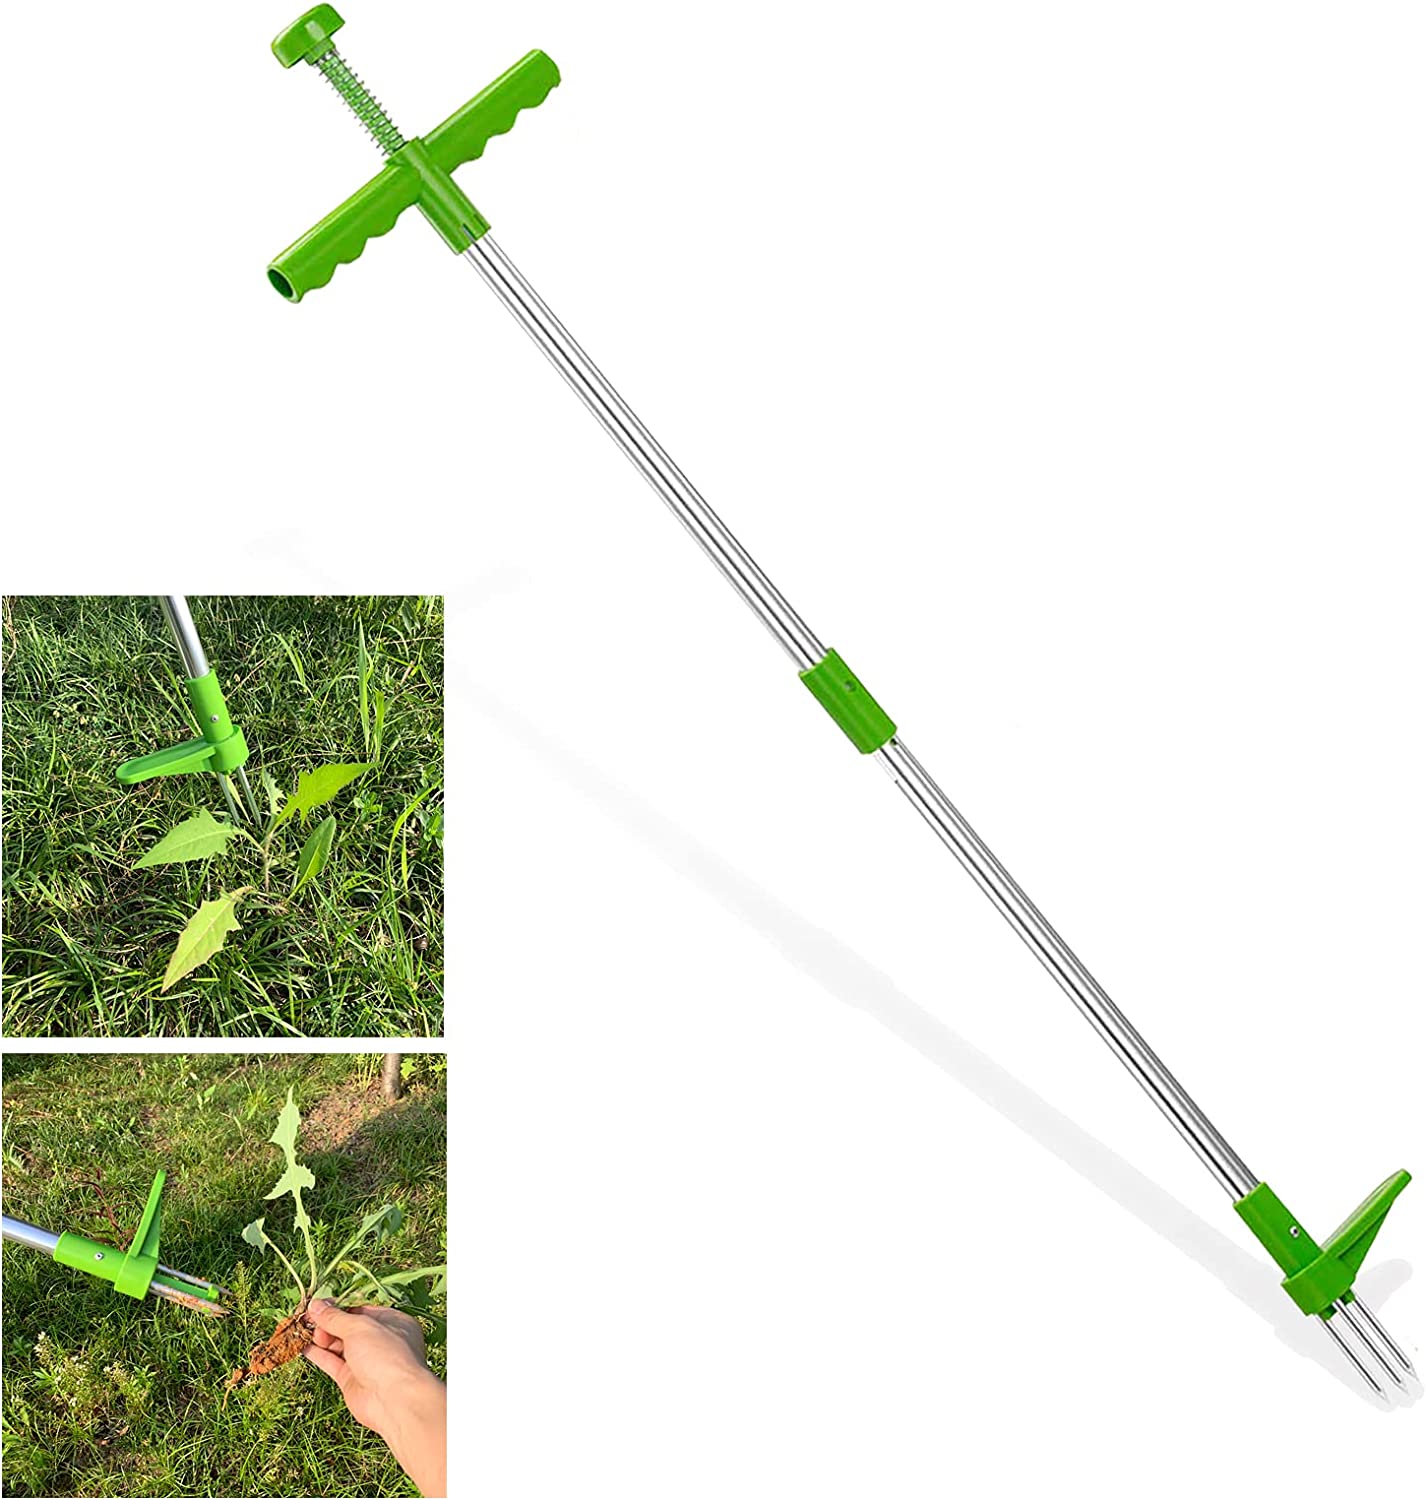 Homthia Standing Plant Root Remover, 3 Claws Stand Up Weed Puller Garden Hand Tool with 39" Long Handle and High Strength Foot Pedal